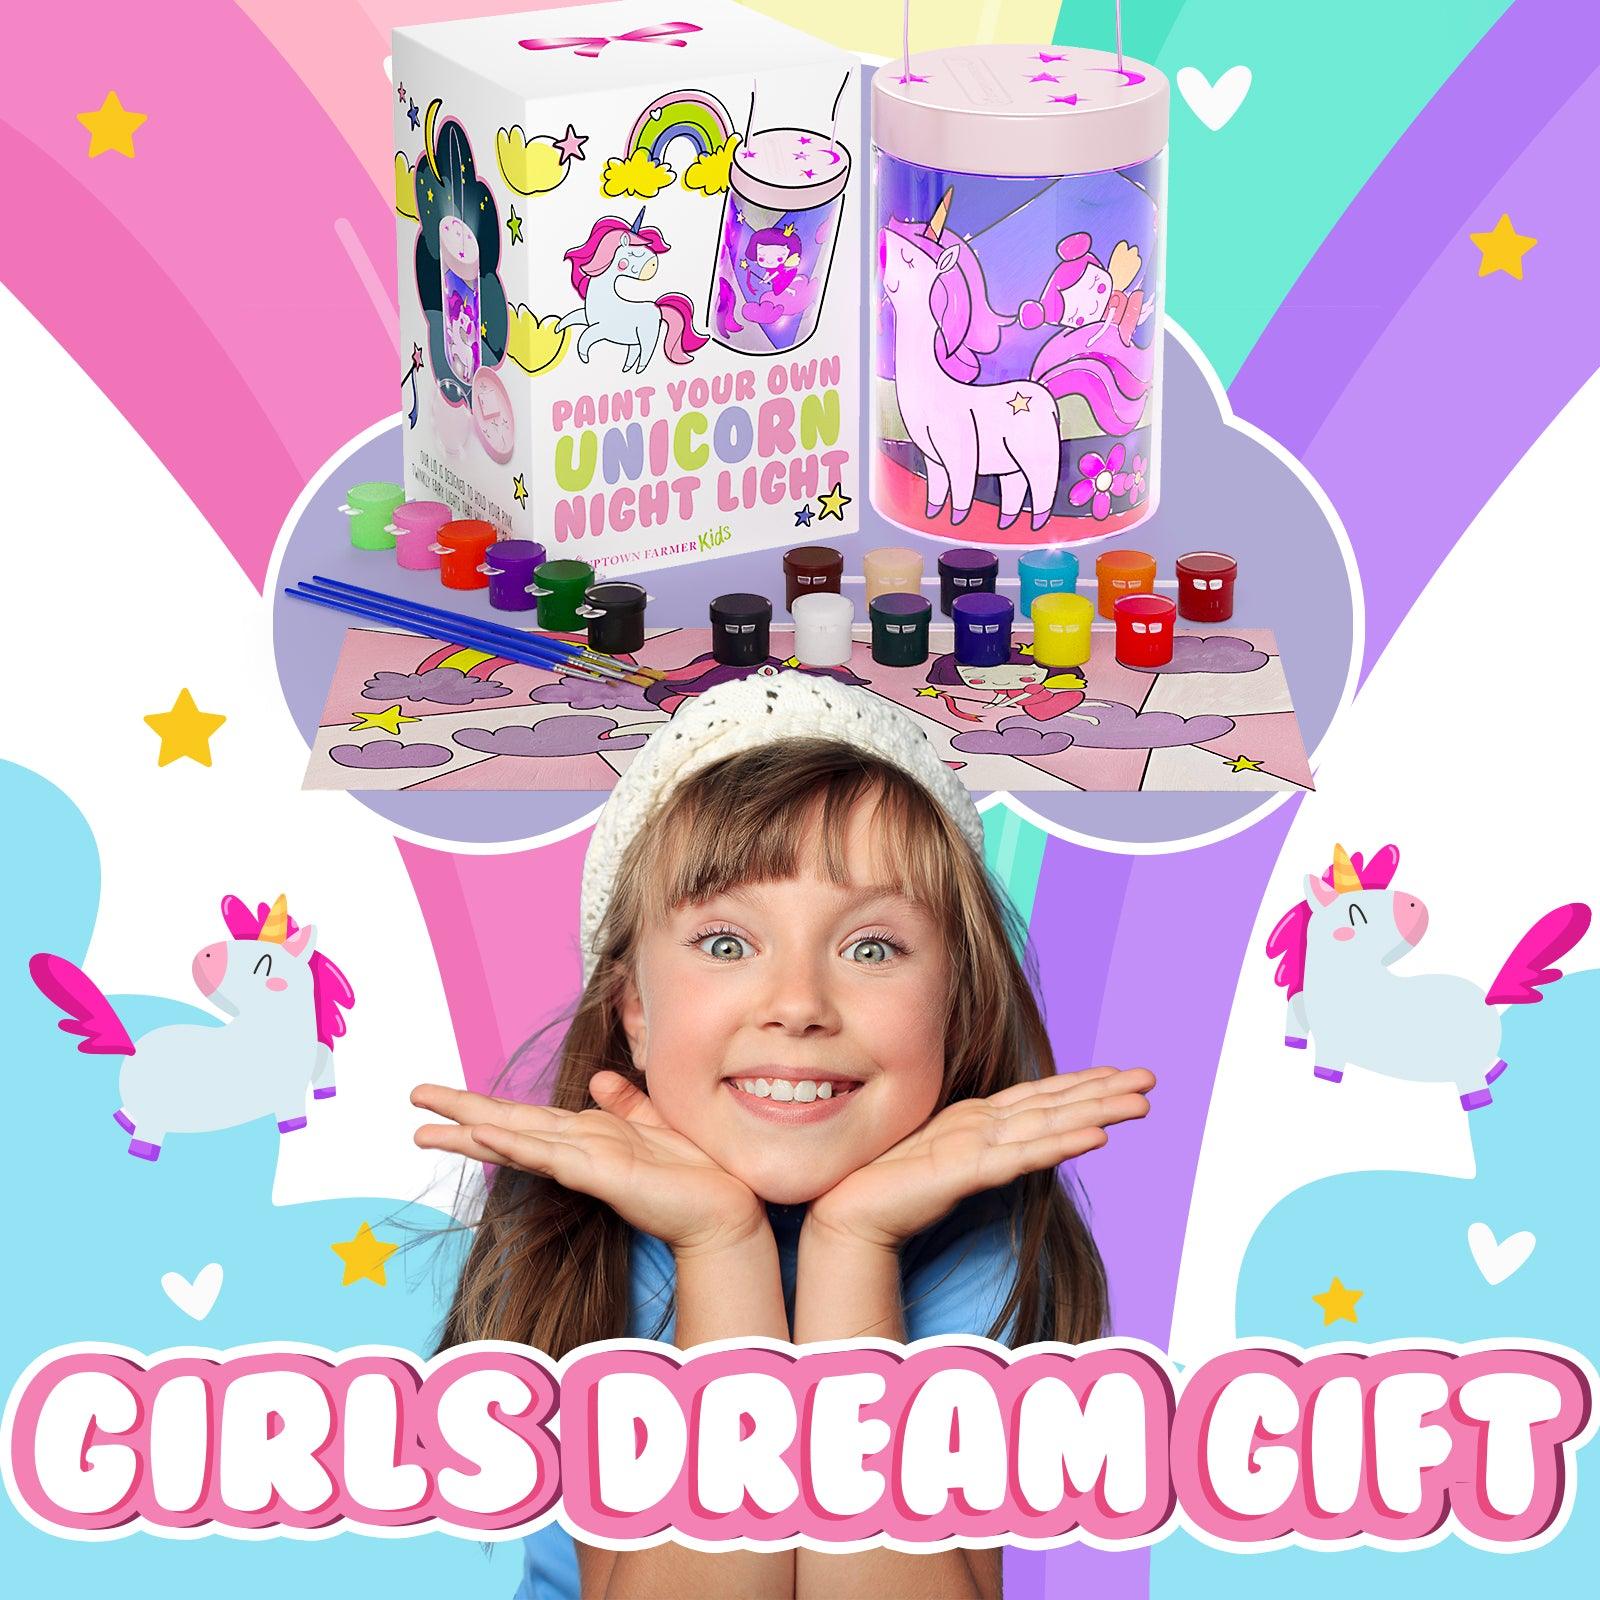 Unicorn Gift Toys for 3 4 5 6 7 8 Years Old Girls - Unicorn Arts and Crafts Painting  Kit Including 8 Cute Looking Unicorn Figures, DIY Creative Toy Gift for  Kids